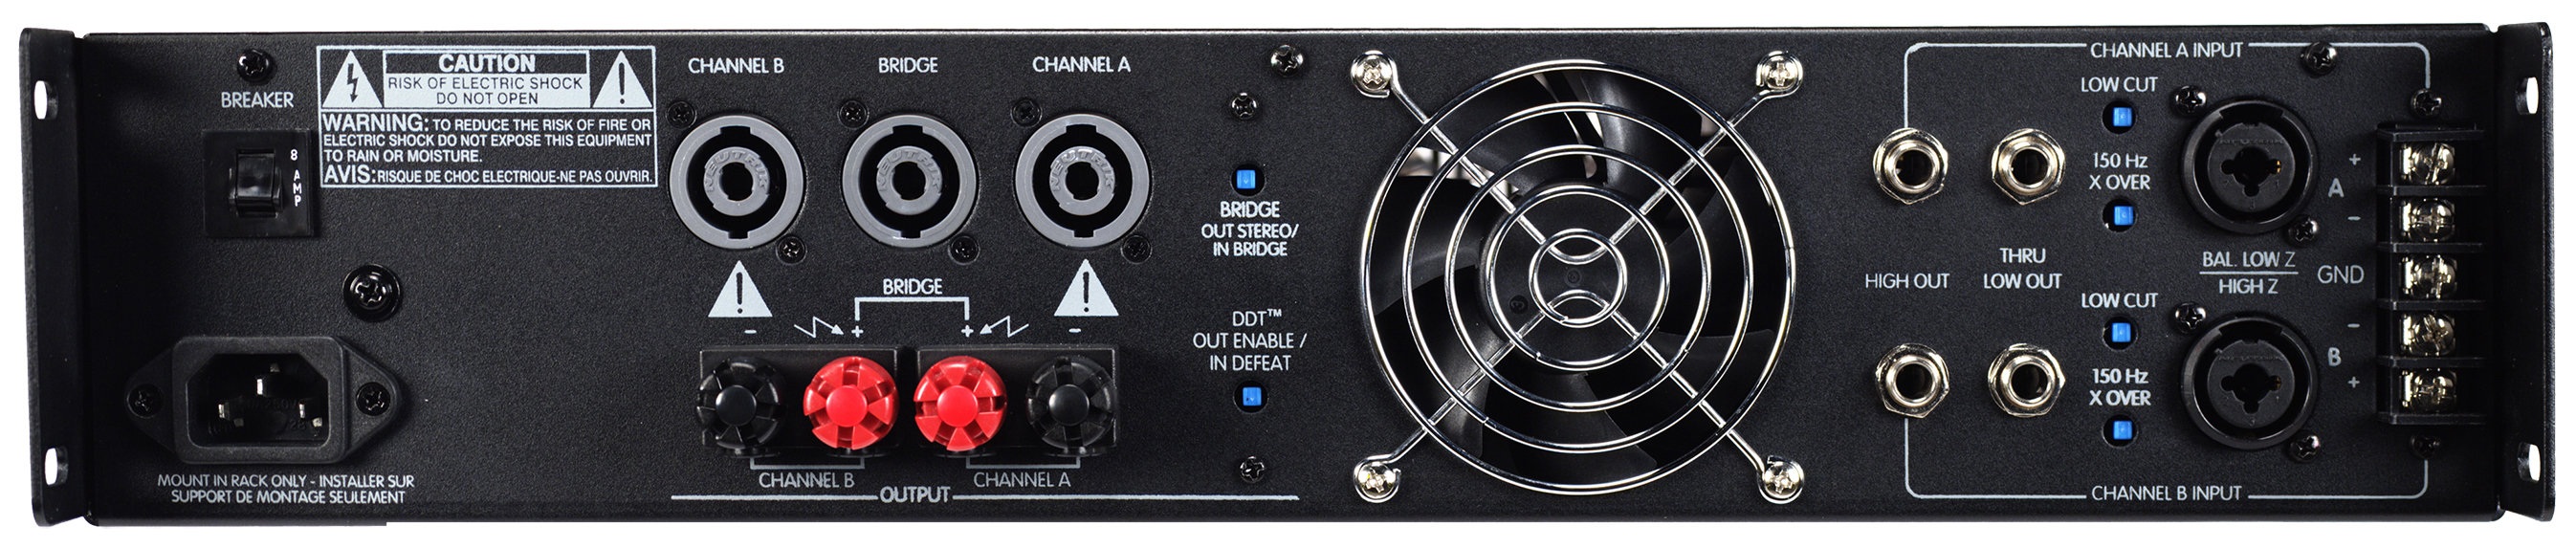 CPX™ 1500 – Peavey Commercial Audio